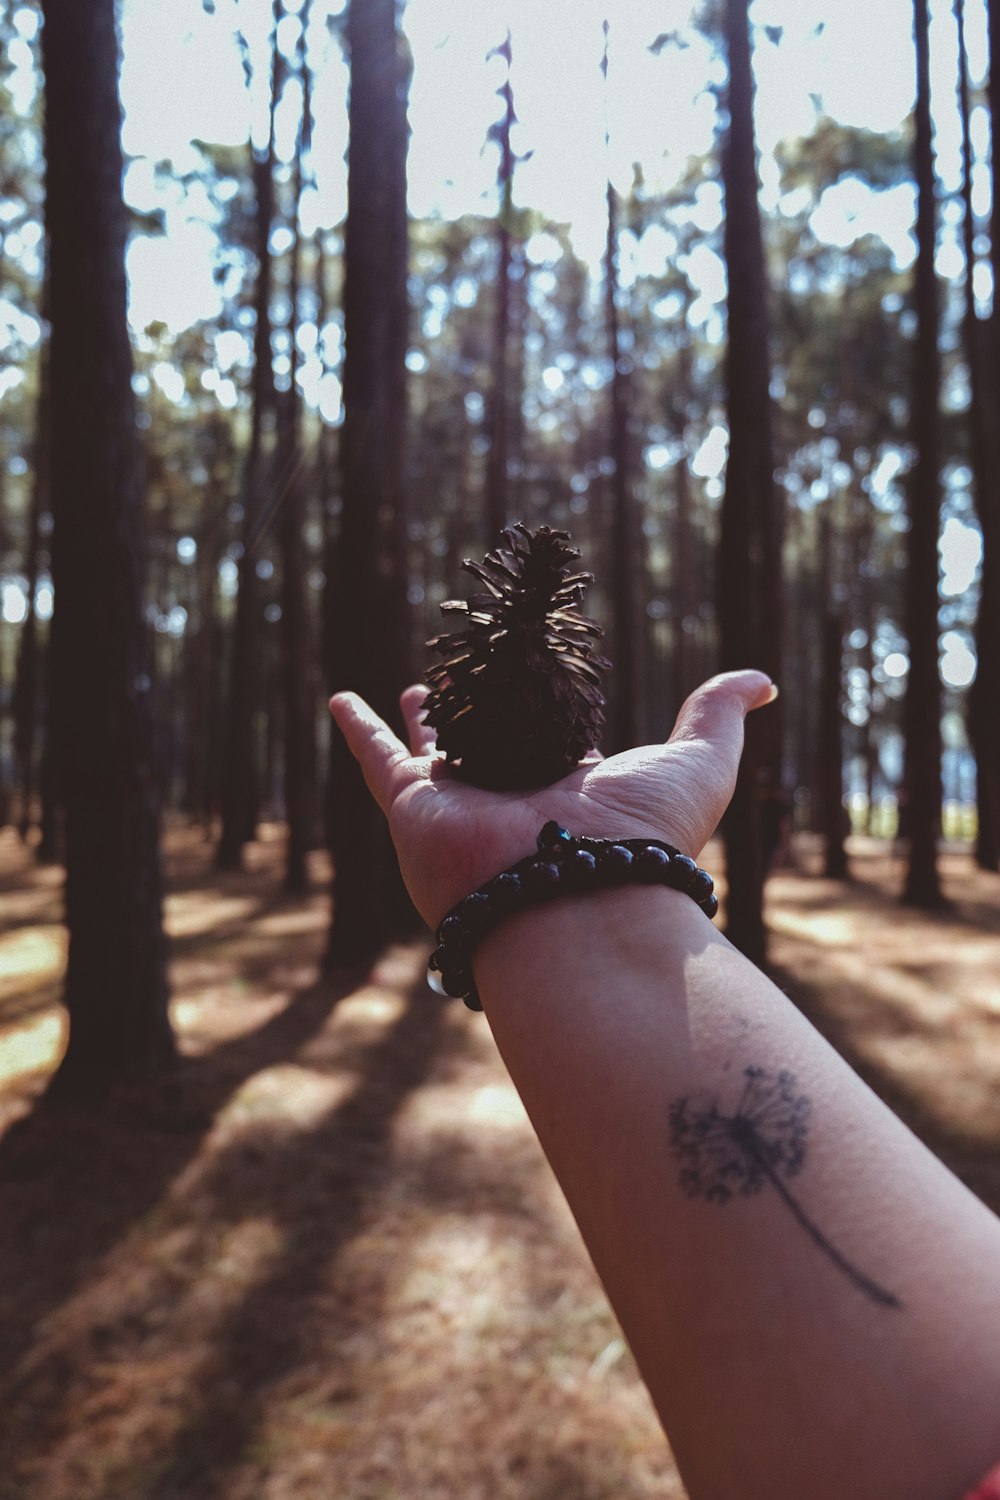 brown pine cone on person's palm